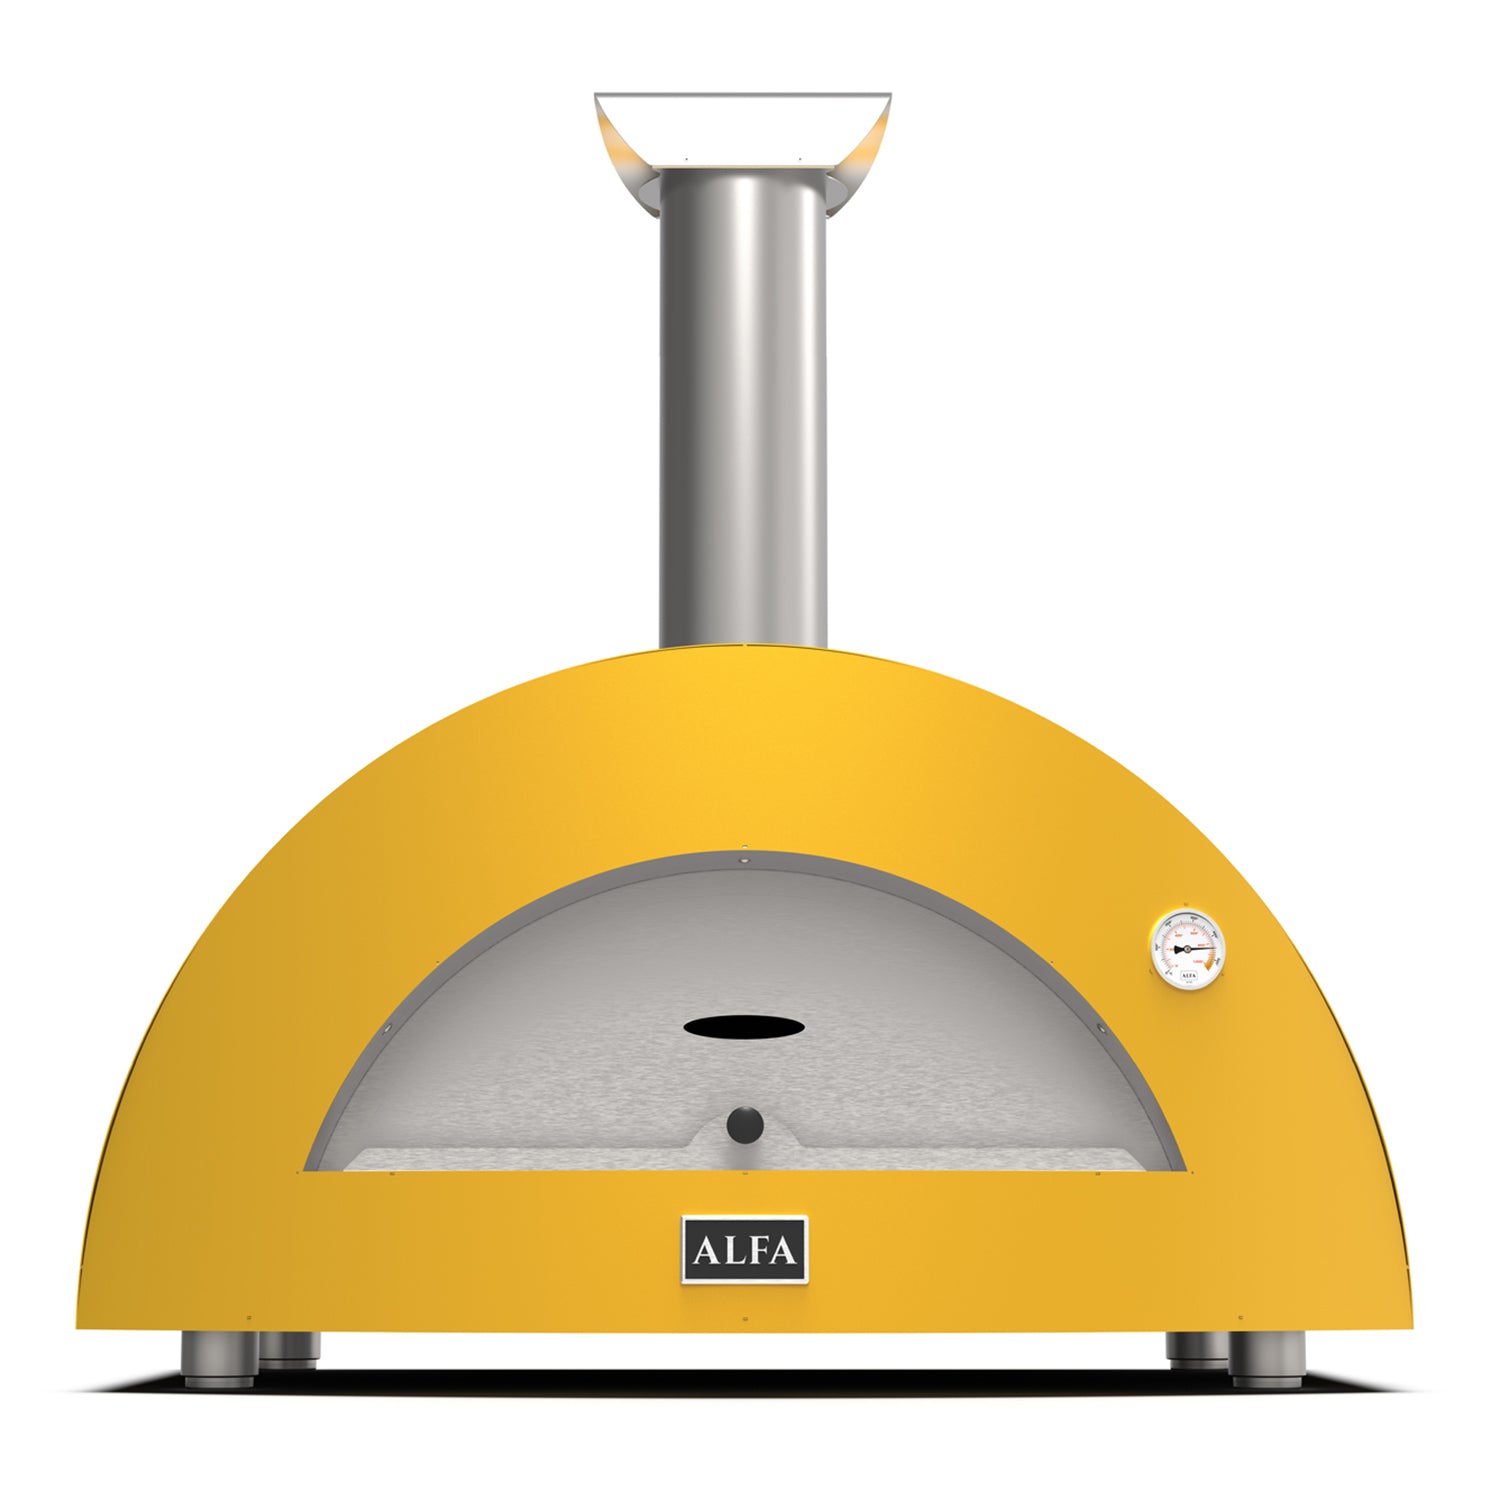 Alfa Moderno 3 Pizze Gas Pizza Oven - Fire Yellow - FXMD-3P-MGIA-U